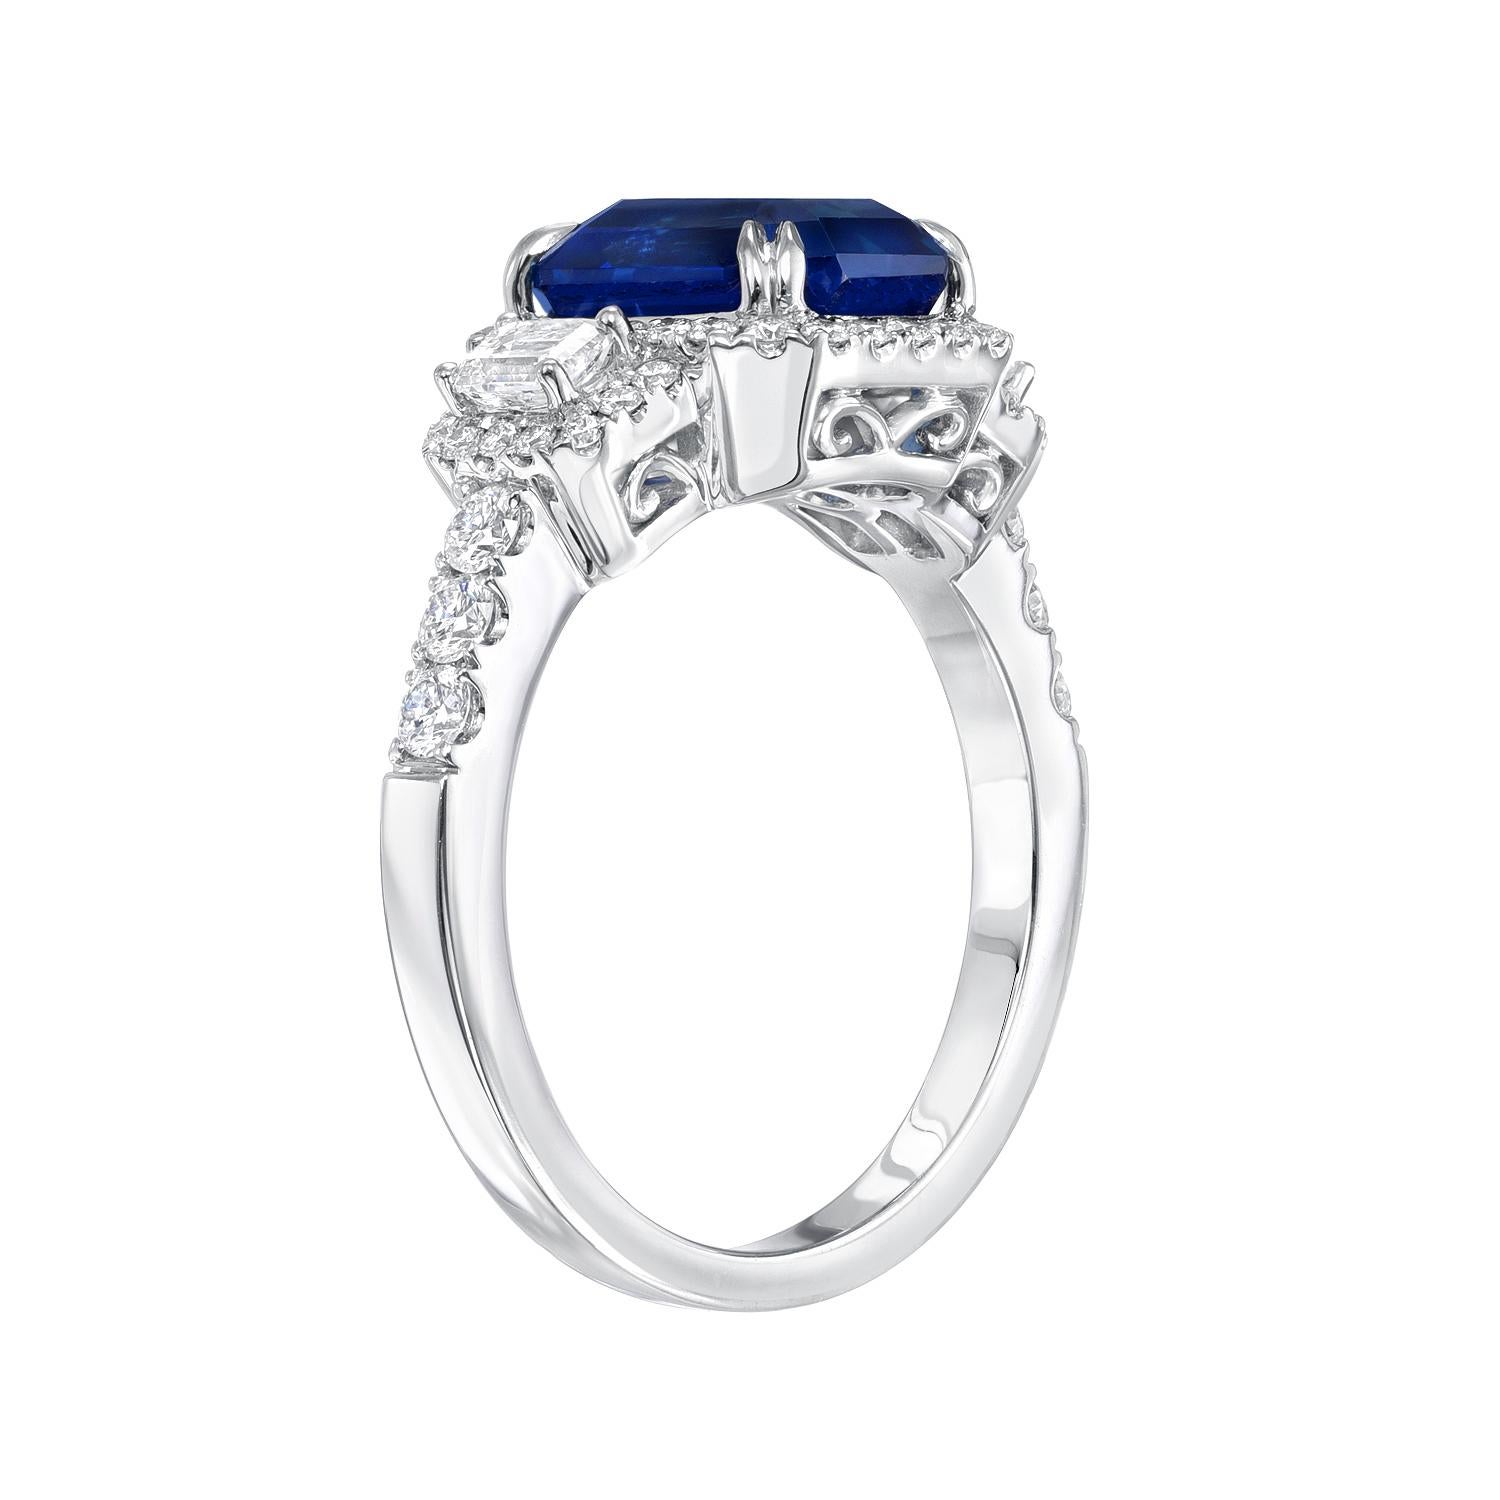 Classic 3.58 carat emerald-cut Blue Sapphire, 18K white gold ring, flanked by a pair of emerald-cut diamonds and round brilliant diamonds weighing a total of 0.77 carats. 
Ring size 6.5 Resizing is complementary upon request.
Crafted by extremely